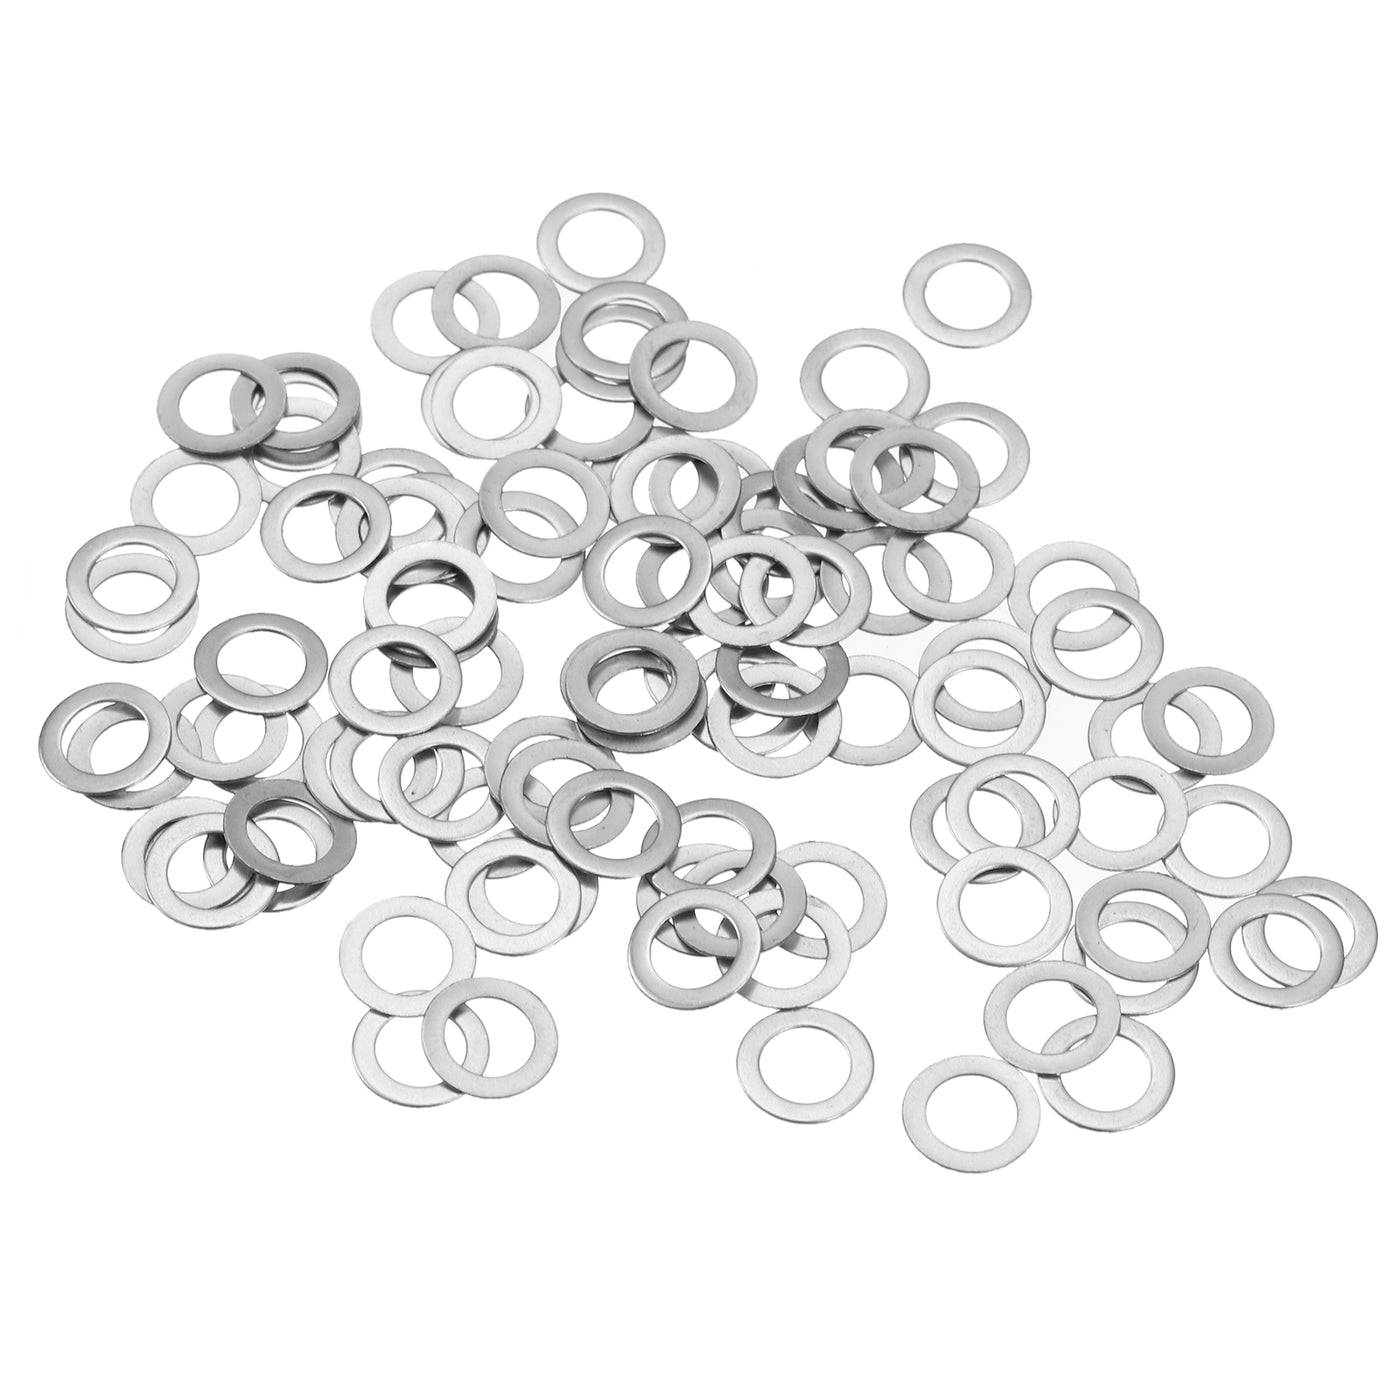 uxcell Uxcell M5 304 Stainless Steel Flat Washers, 100pcs 5x8x0.1mm Ultra Thin Flat Spacers